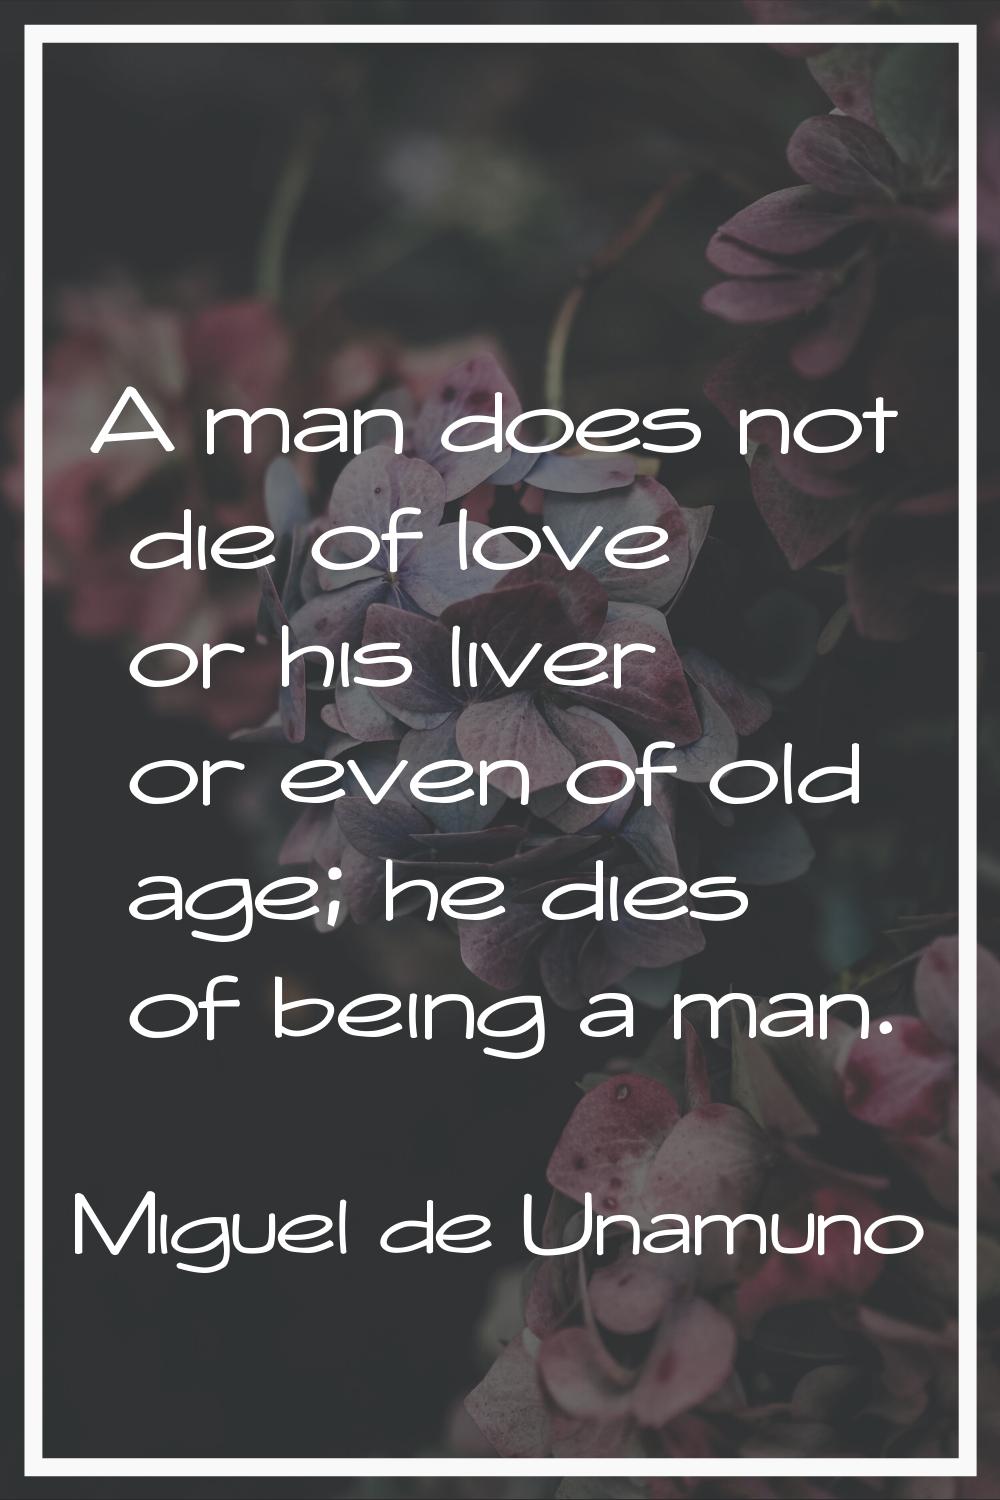 A man does not die of love or his liver or even of old age; he dies of being a man.